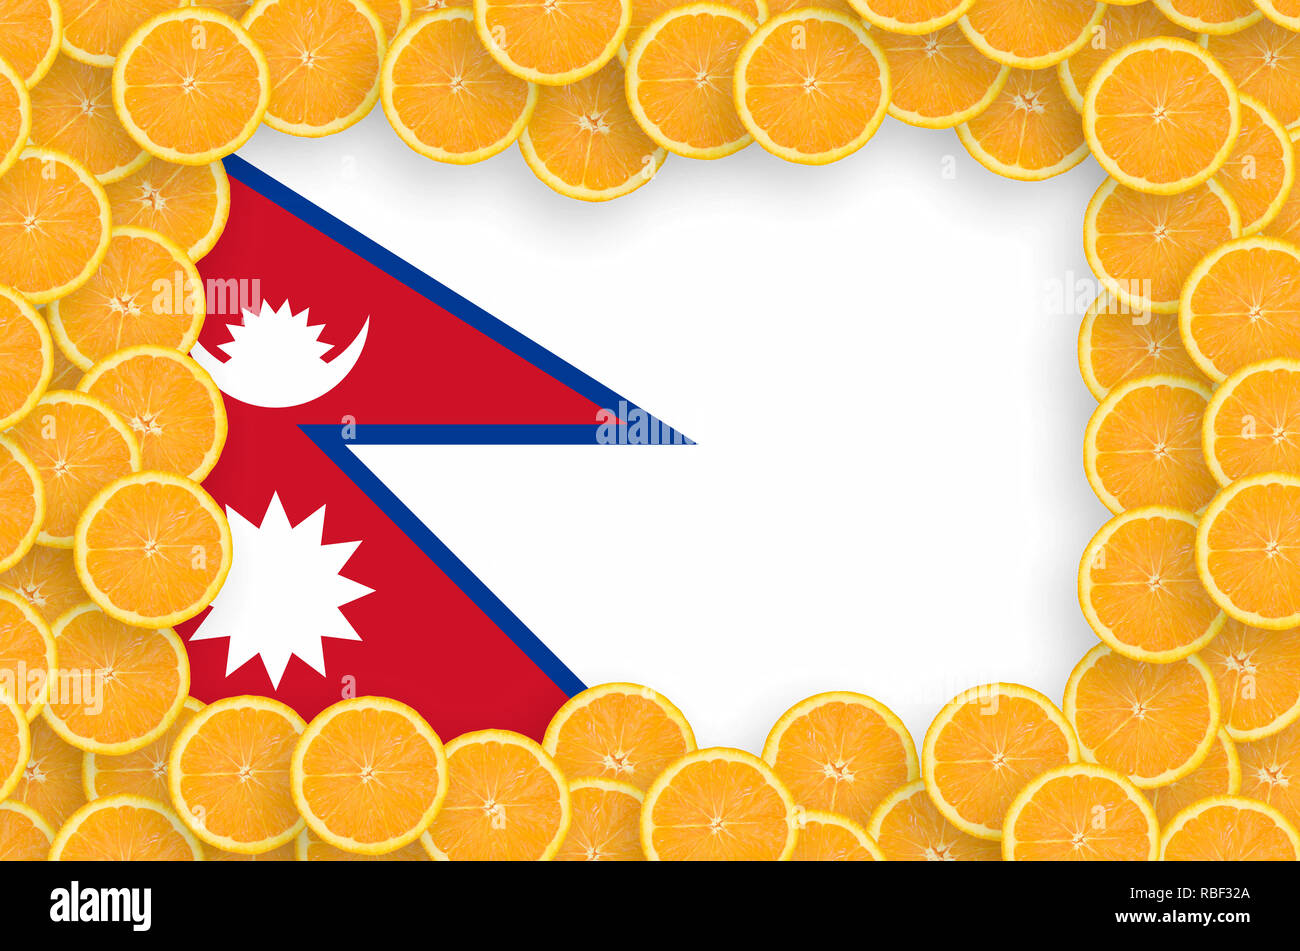 Nepal flag  in frame of orange citrus fruit slices. Concept of growing as well as import and export of citrus fruits Stock Photo